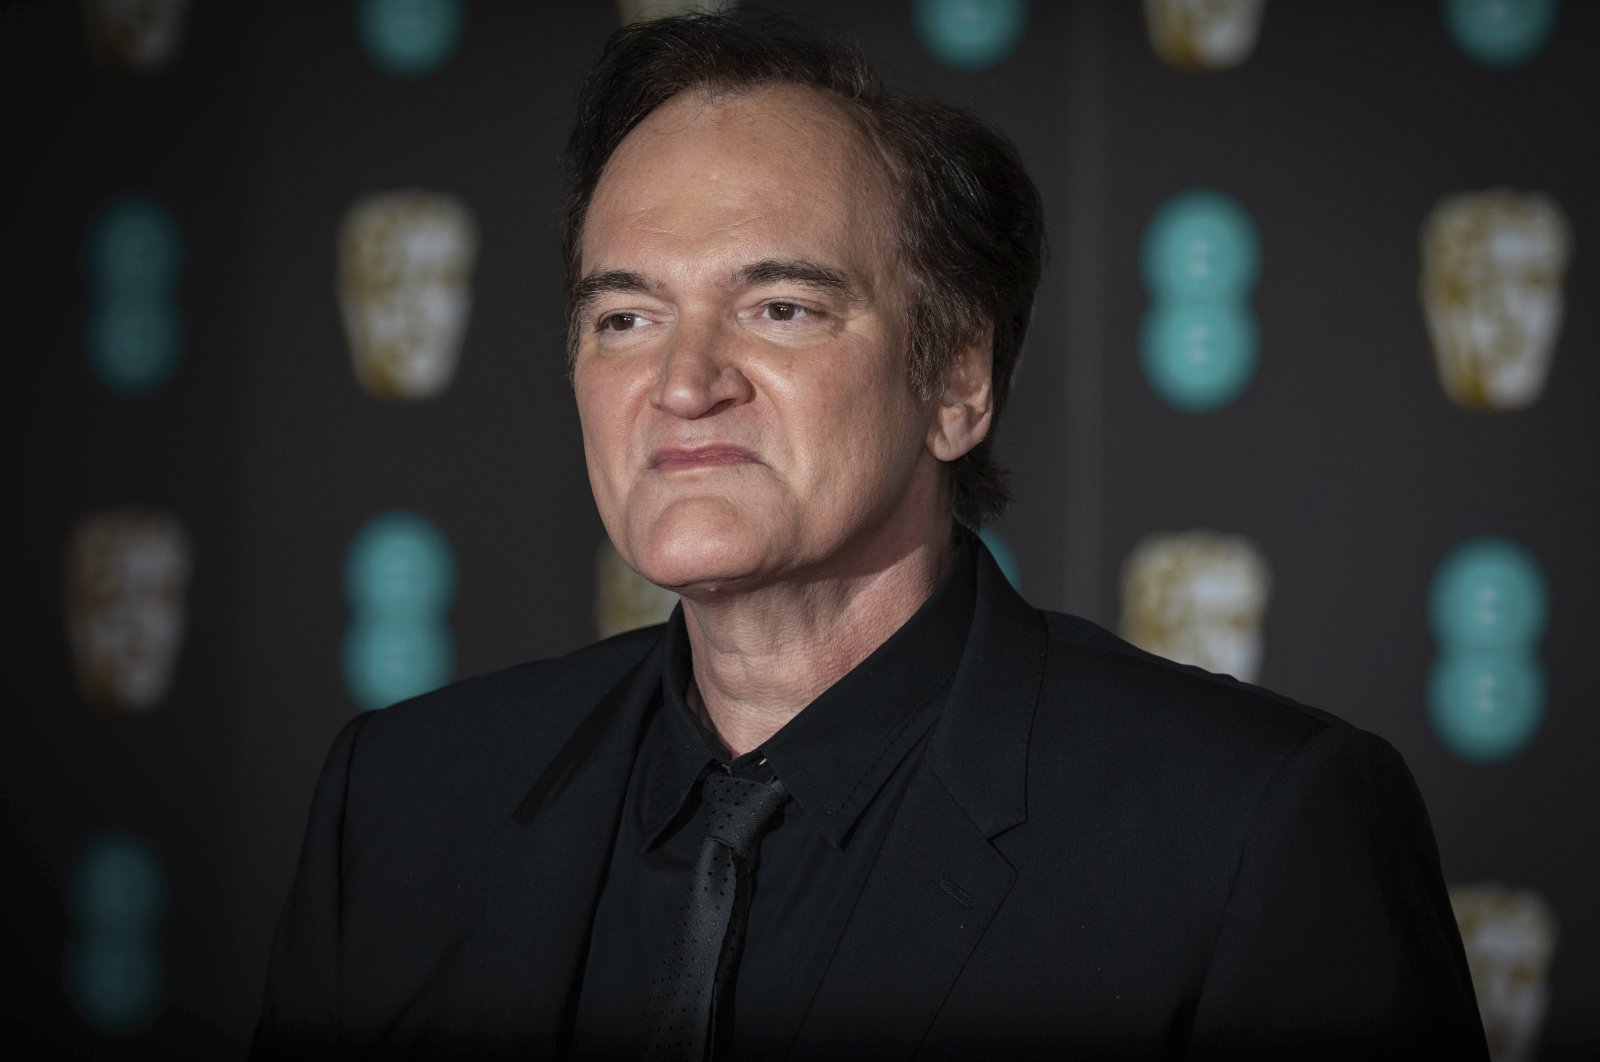 Director Quentin Tarantino poses for photographers arriving at the Bafta Film Awards, in central London, U.K., Feb. 2, 2020. (AP)